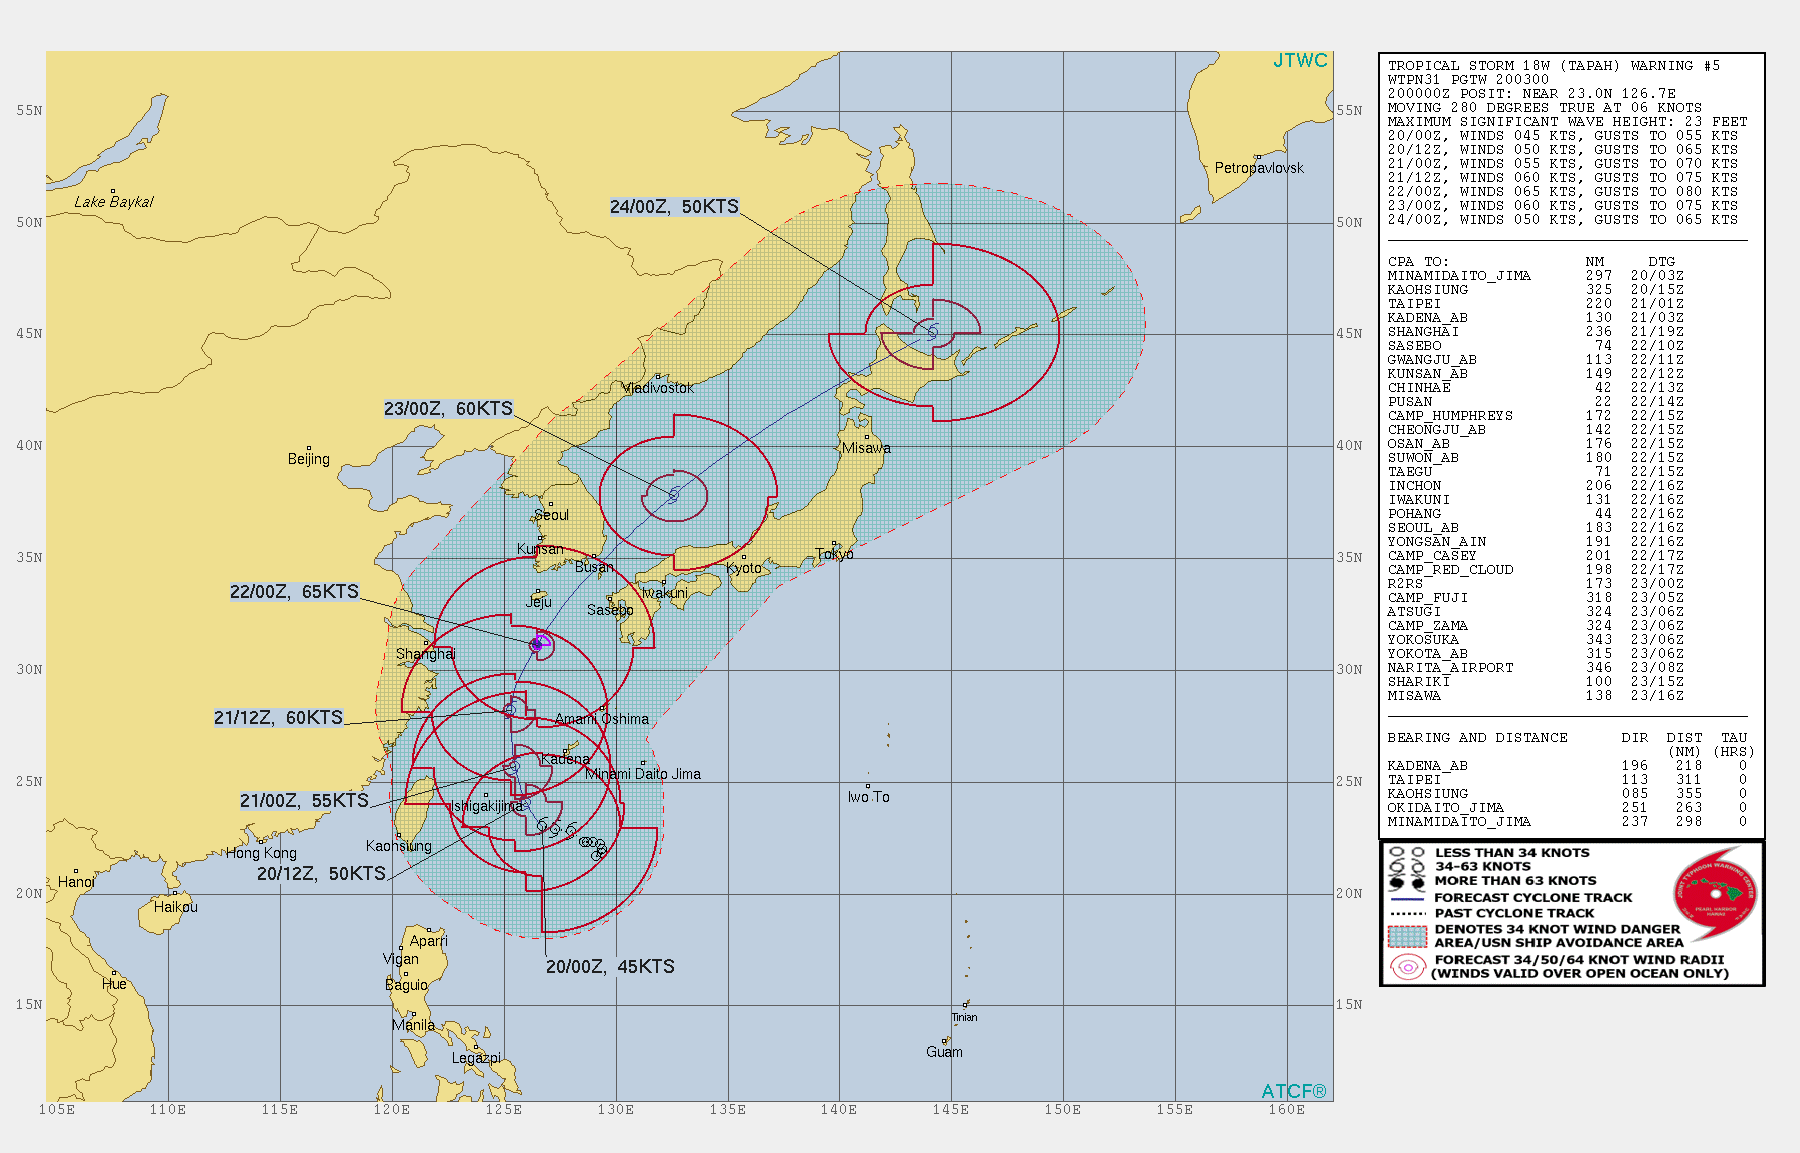 PEAK INTENSITY FORECAST IN 48H AT 65KNOTS